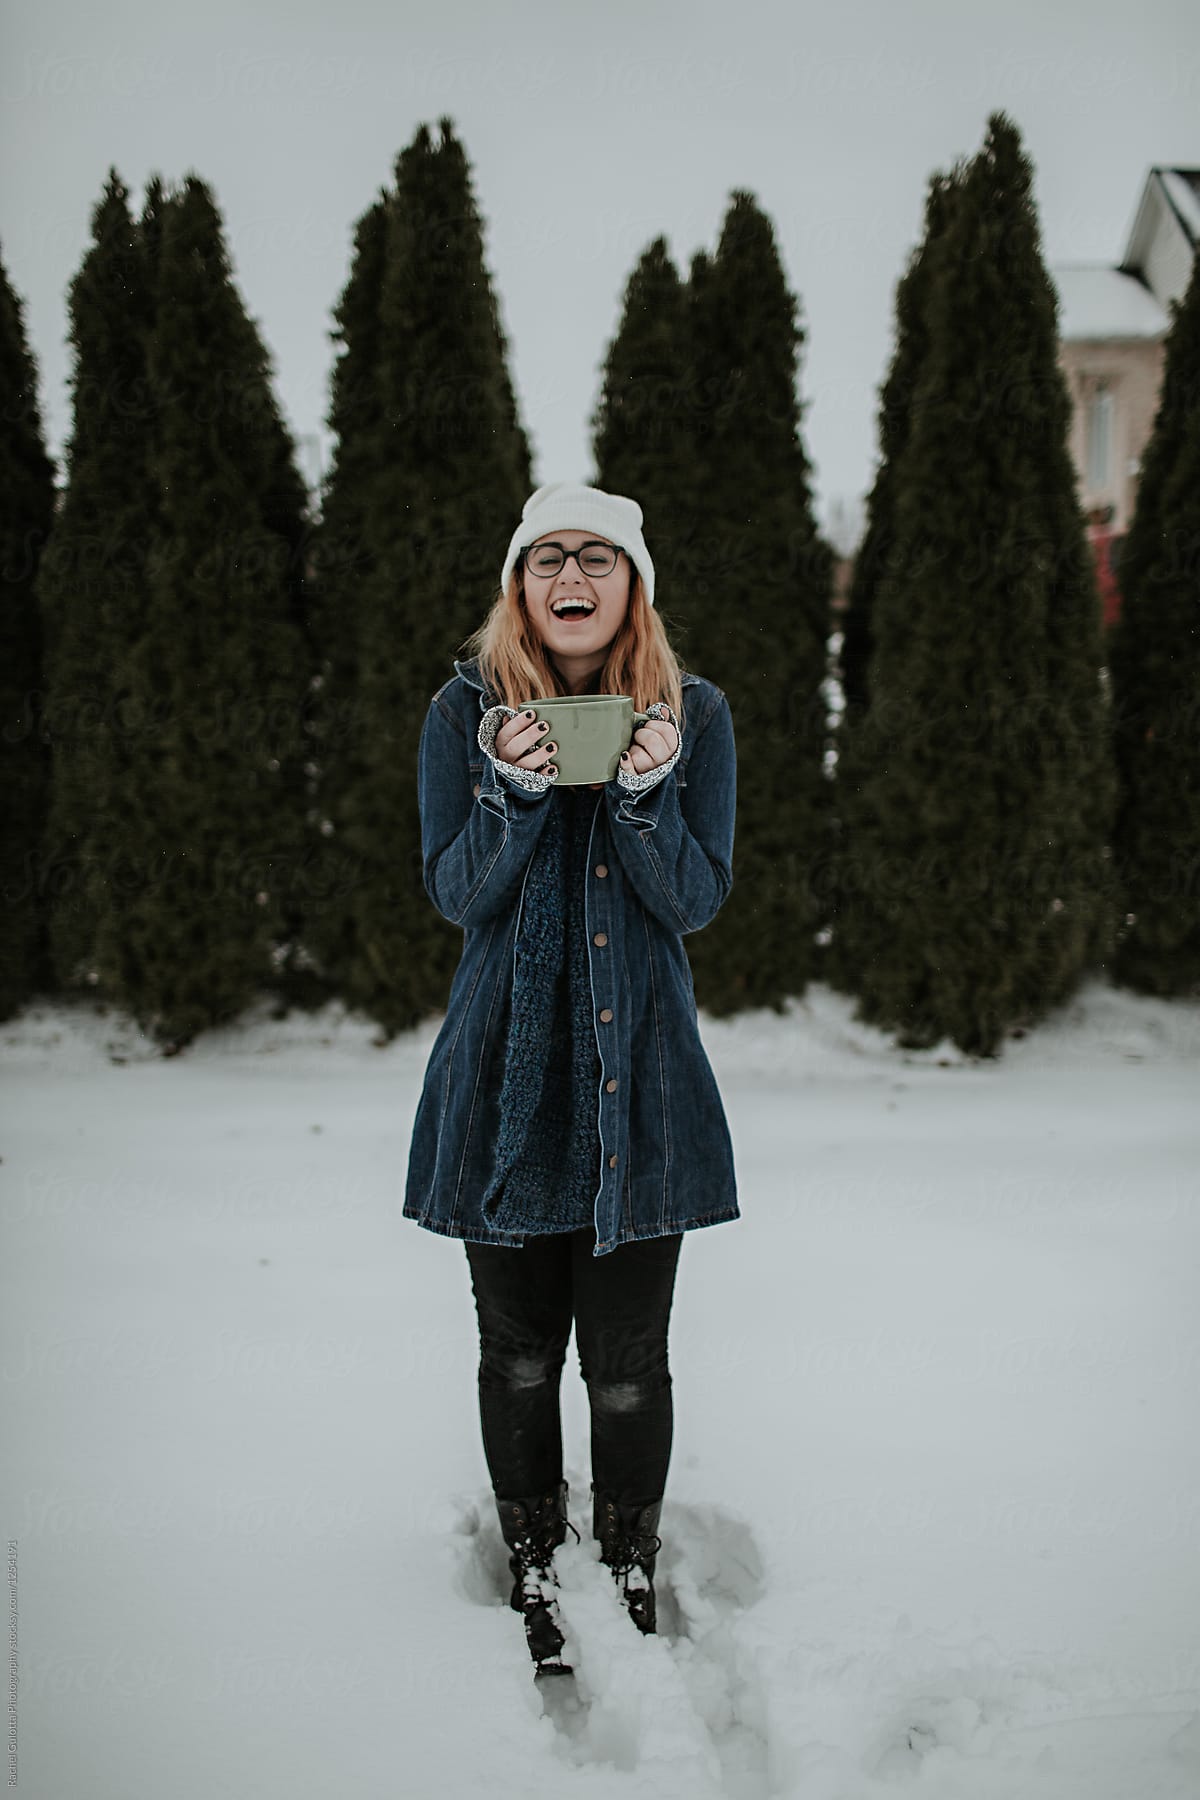 Lifestyle photo of a girl drinking from a large mug outdoors in the snow in front of trees in the winter